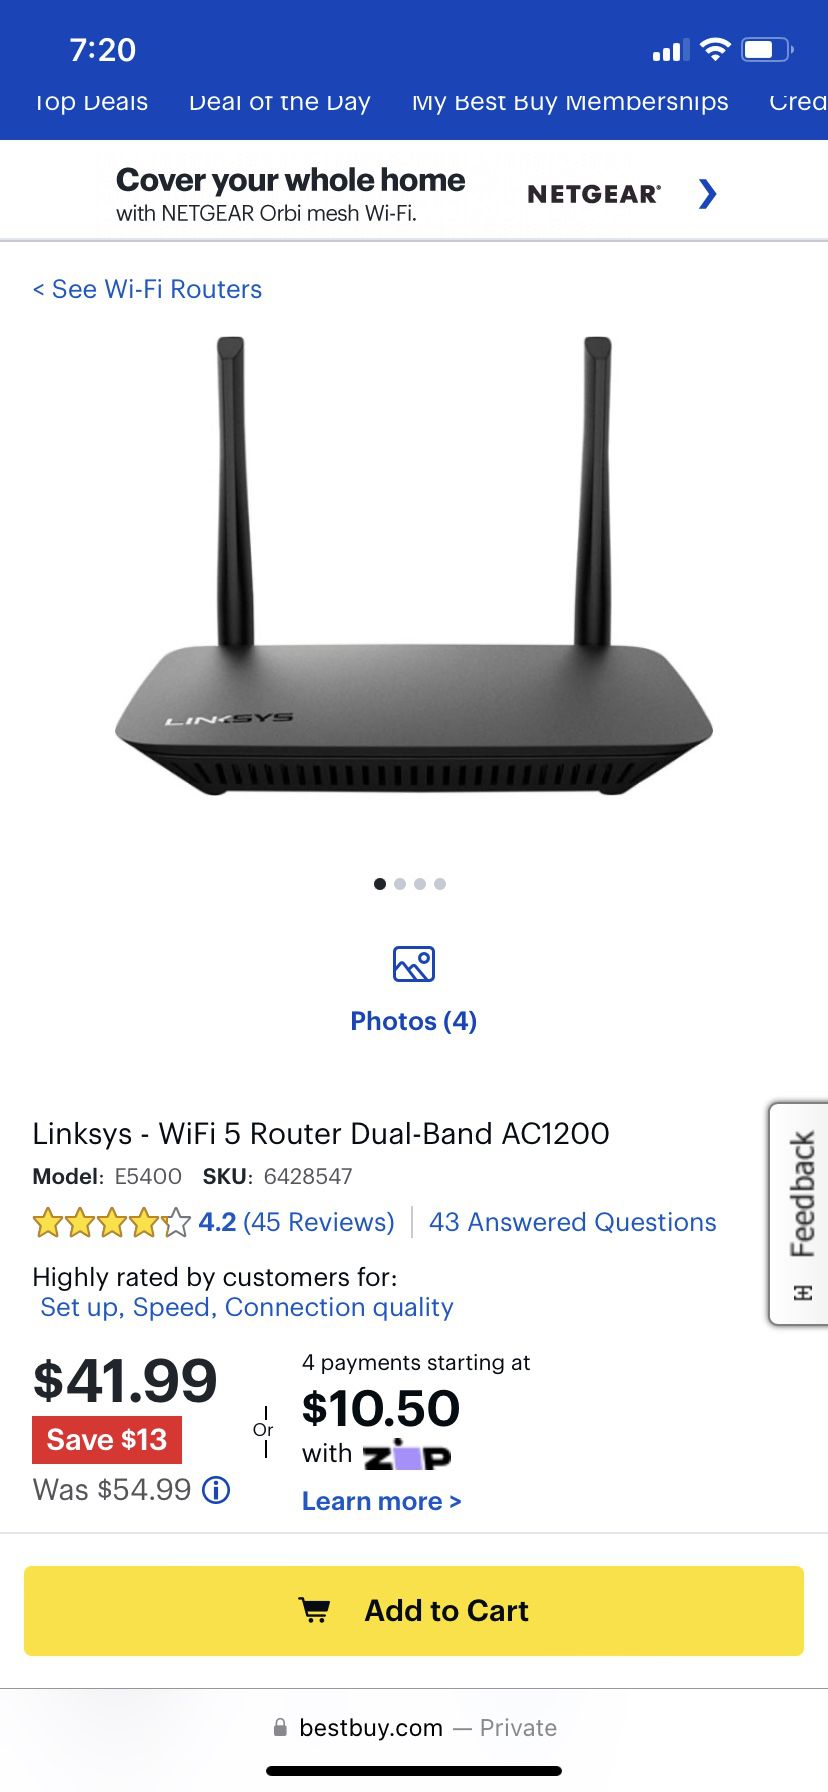 High Speed WI-FI router, Linksys - WiFi 5 Router Dual-Band AC1200